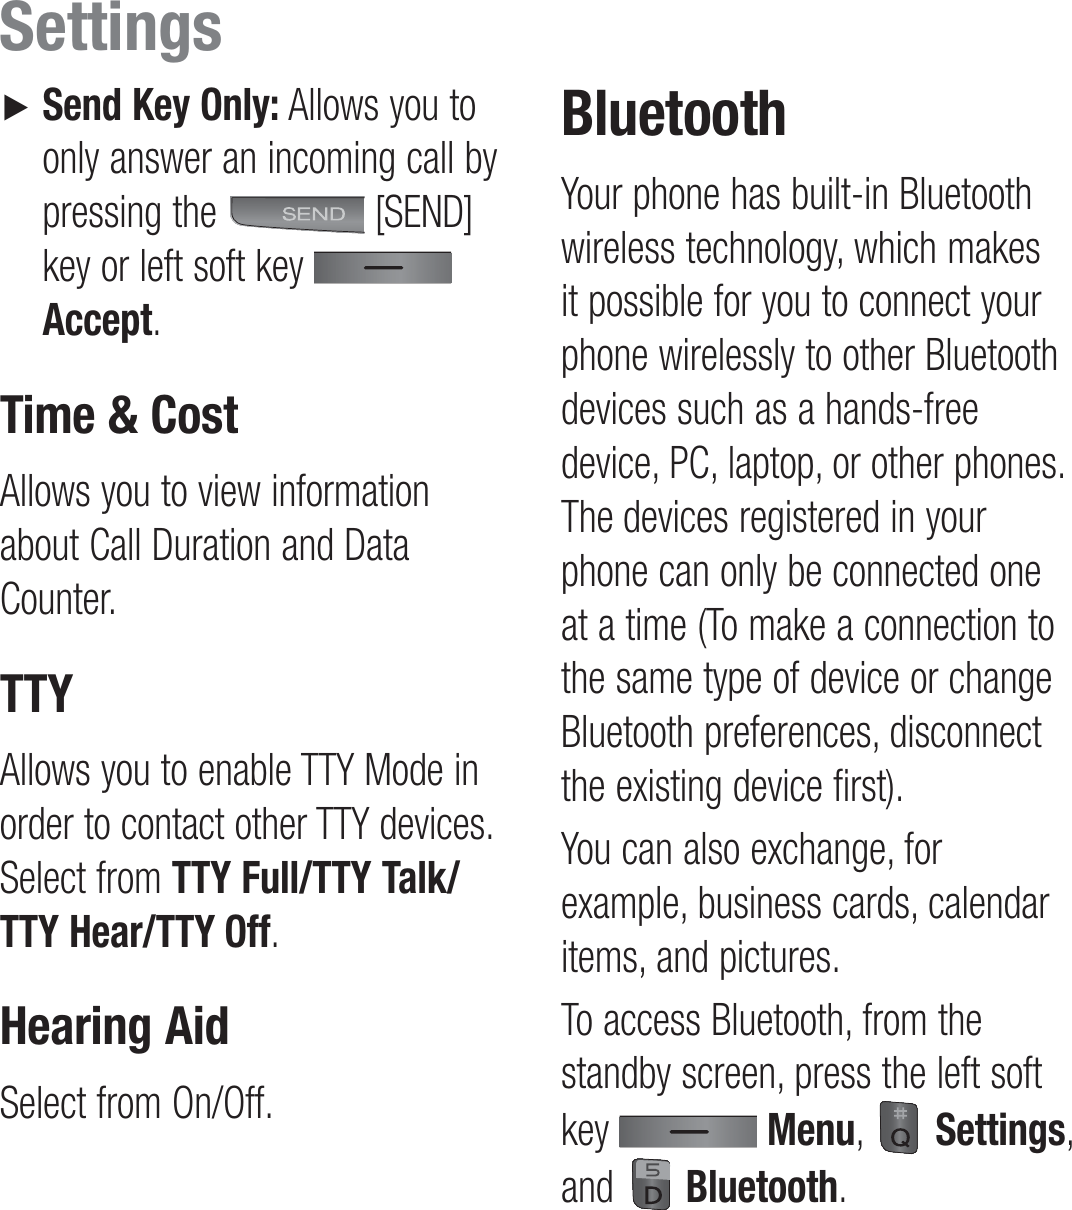 ►    Send Key Only: Allows you to only answer an incoming call by pressing the   [SEND] key or left soft key   Accept.Time &amp; CostAllows you to view information about Call Duration and Data Counter.TTYAllows you to enable TTY Mode in order to contact other TTY devices. Select from TTY Full/TTY Talk/TTY Hear/TTY Off.Hearing AidSelect from On/Off.BluetoothYour phone has built-in Bluetooth wireless technology, which makes it possible for you to connect your phone wirelessly to other Bluetooth devices such as a hands-free device, PC, laptop, or other phones. The devices registered in your phone can only be connected one at a time (To make a connection to the same type of device or change Bluetooth preferences, disconnect the existing device first).You can also exchange, for example, business cards, calendar items, and pictures.To access Bluetooth, from the standby screen, press the left soft key   Menu,   Settings,  and   Bluetooth.Settings